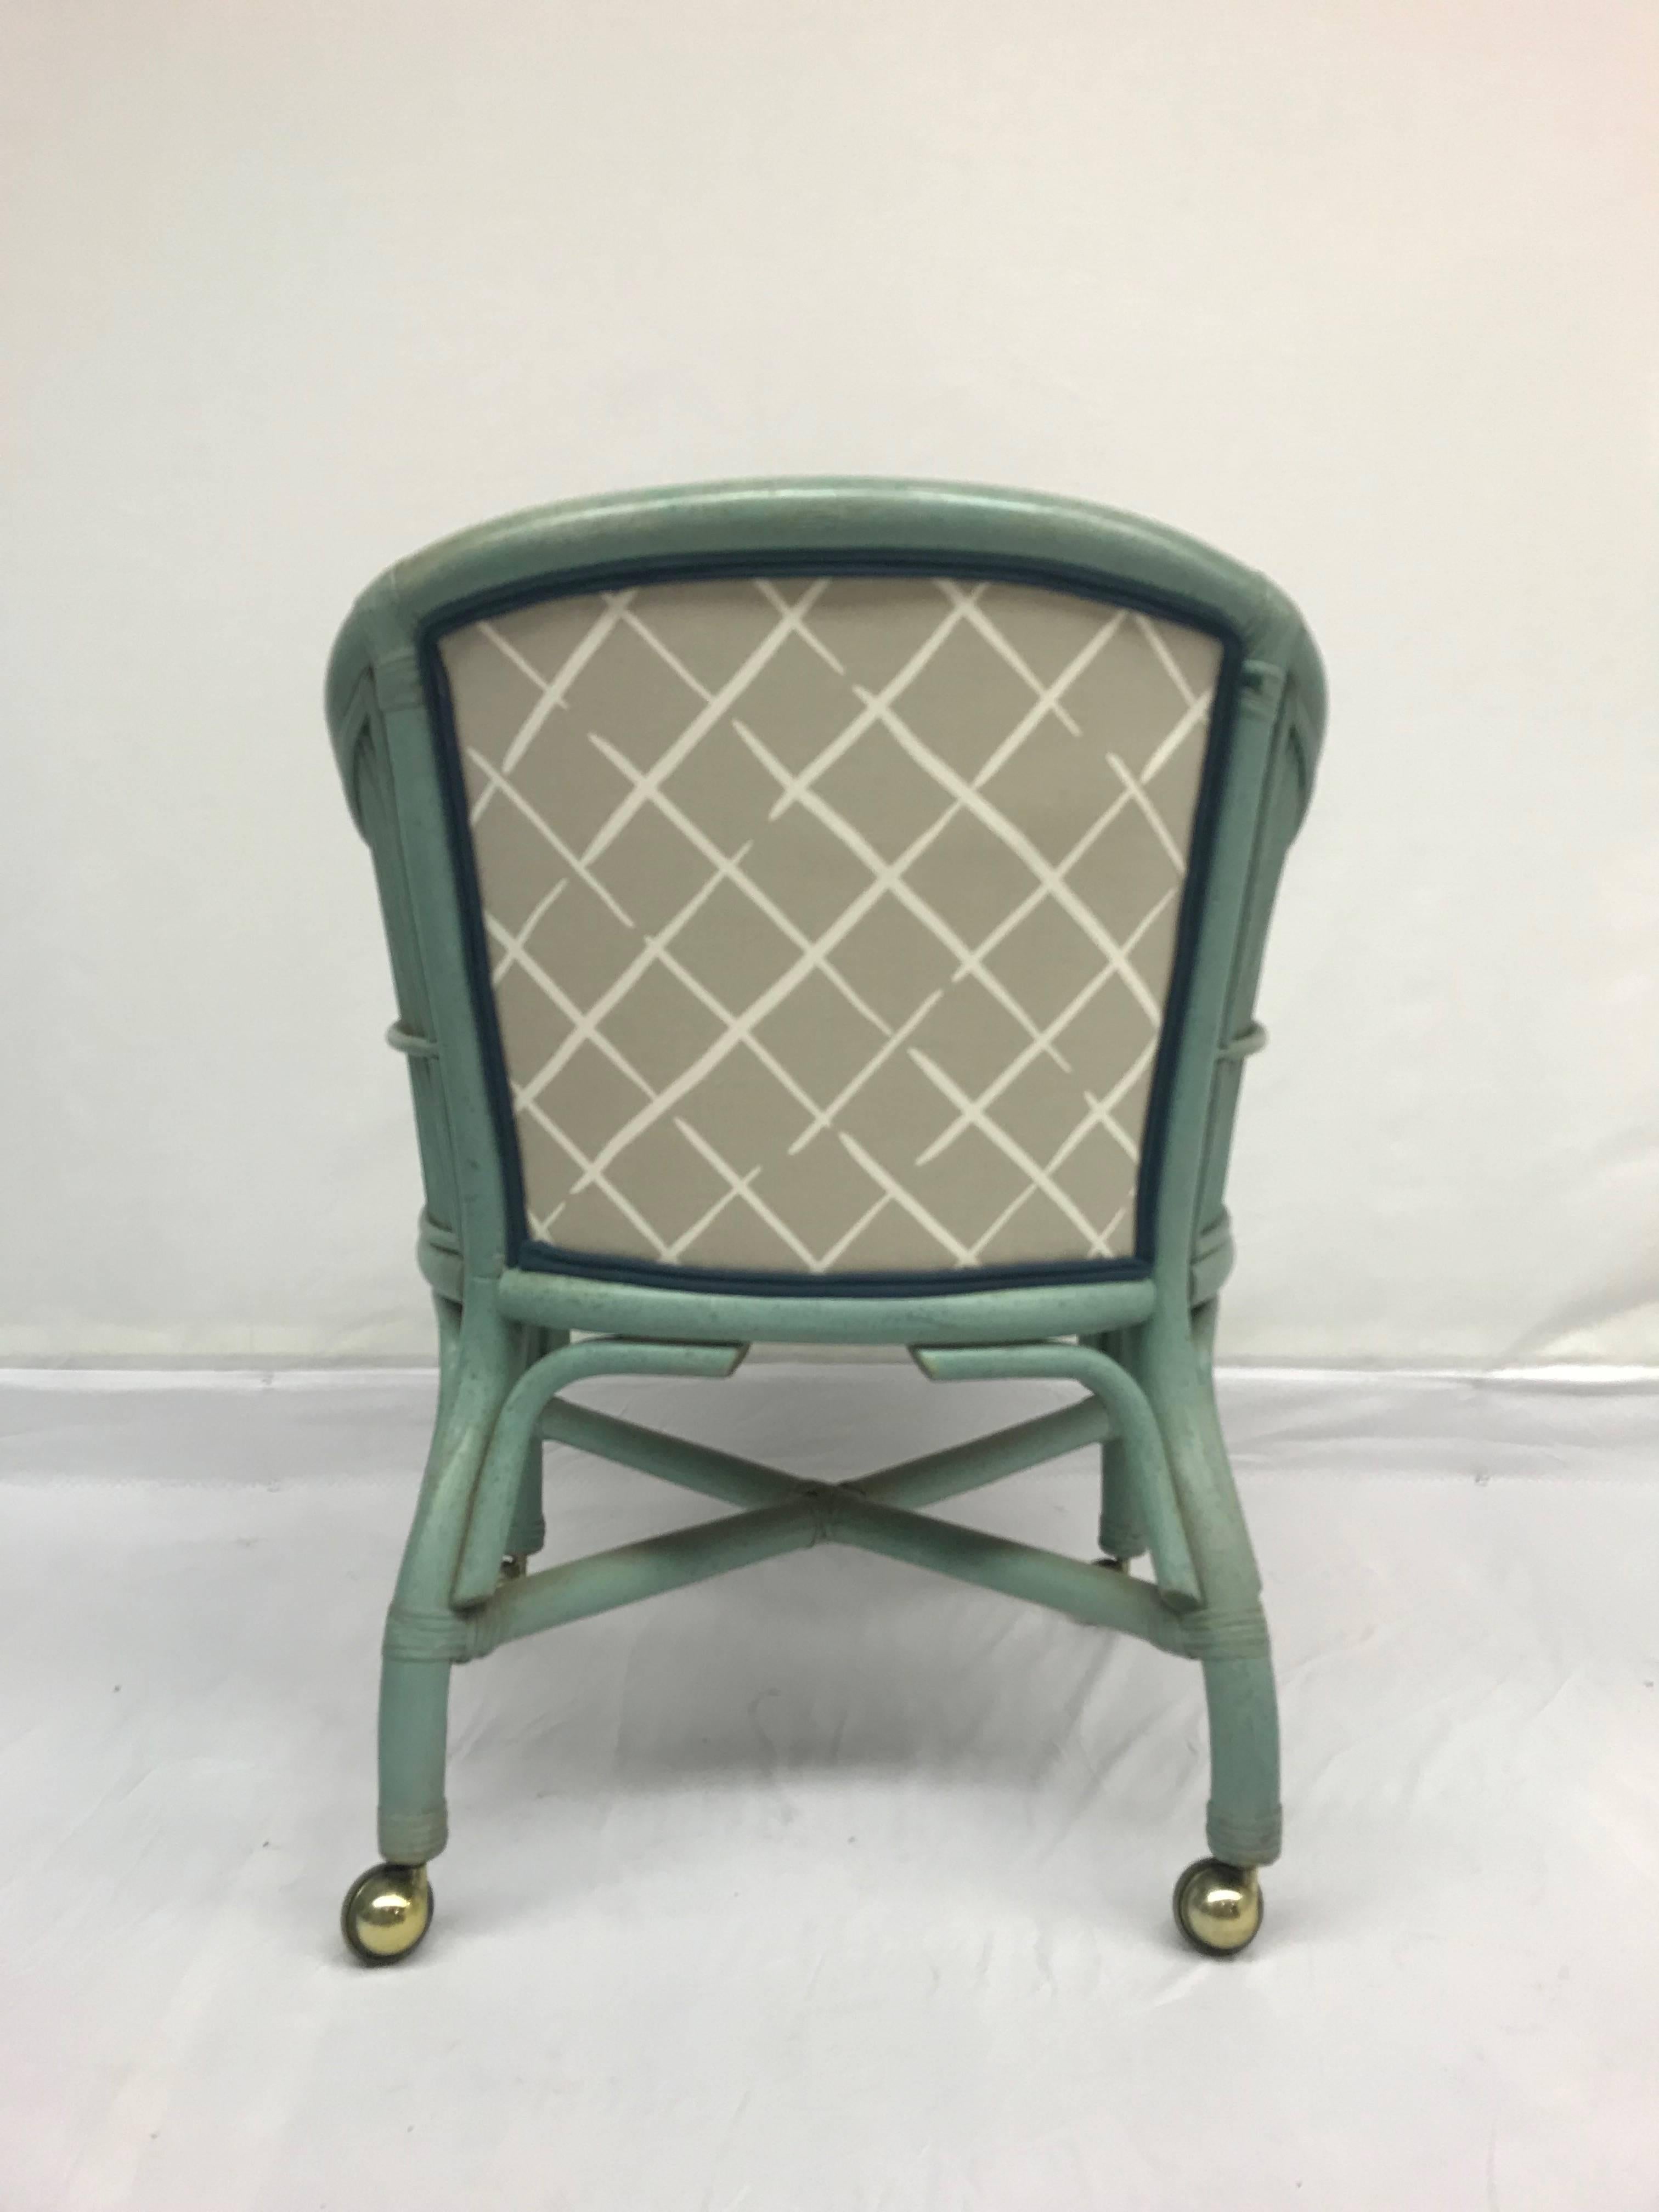 Vintage Seafoam Blue Rattan Chairs With Casters - Set of 4 In Good Condition For Sale In High Point, NC